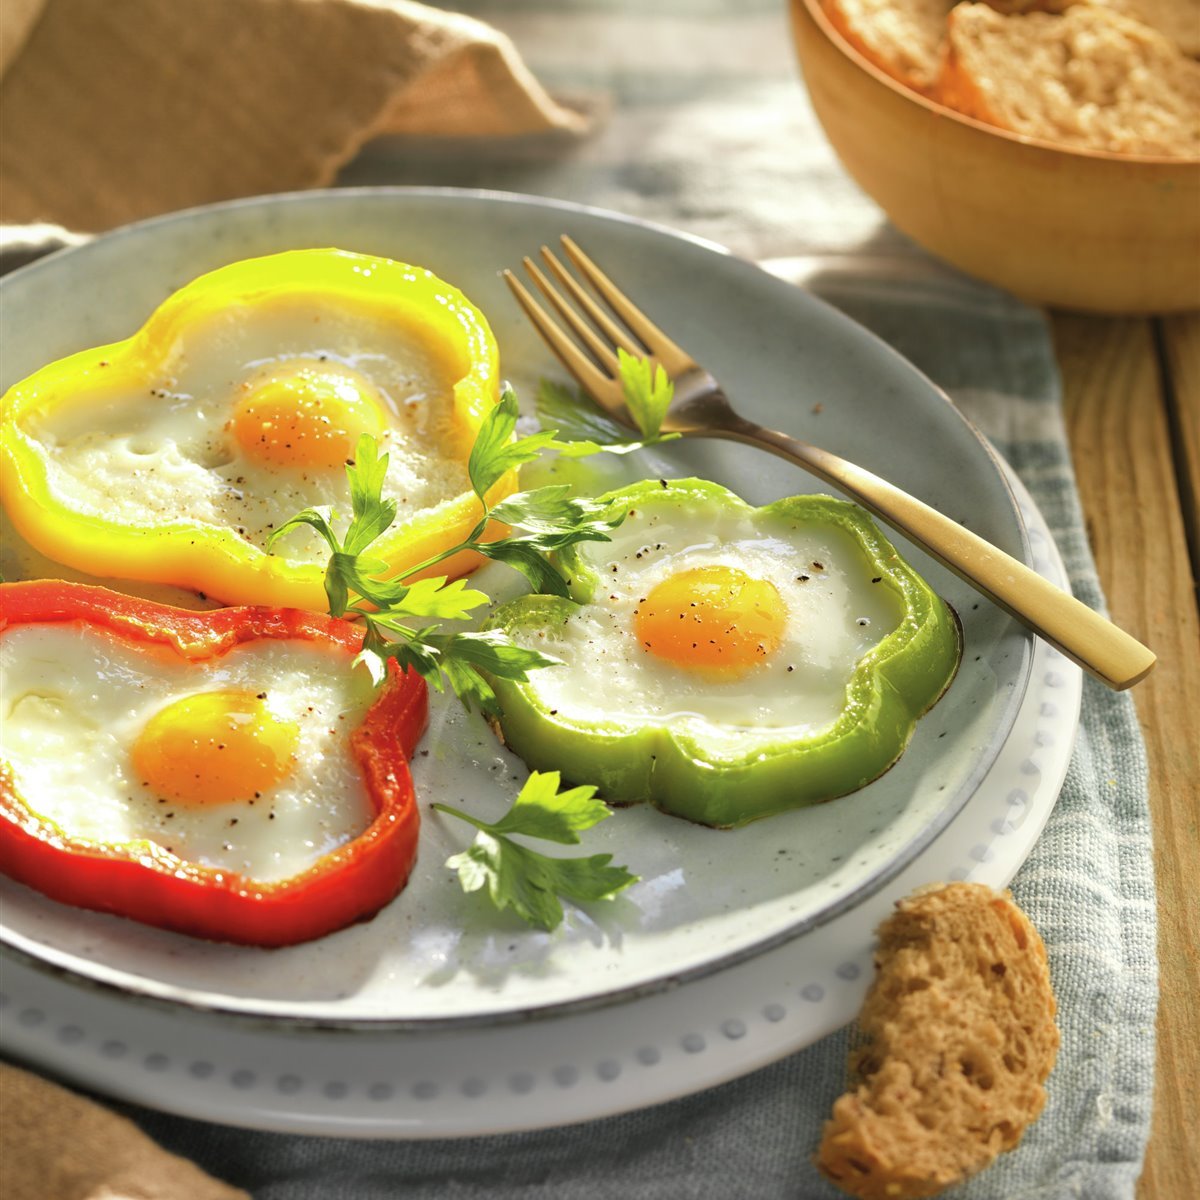 Eggs with peppers